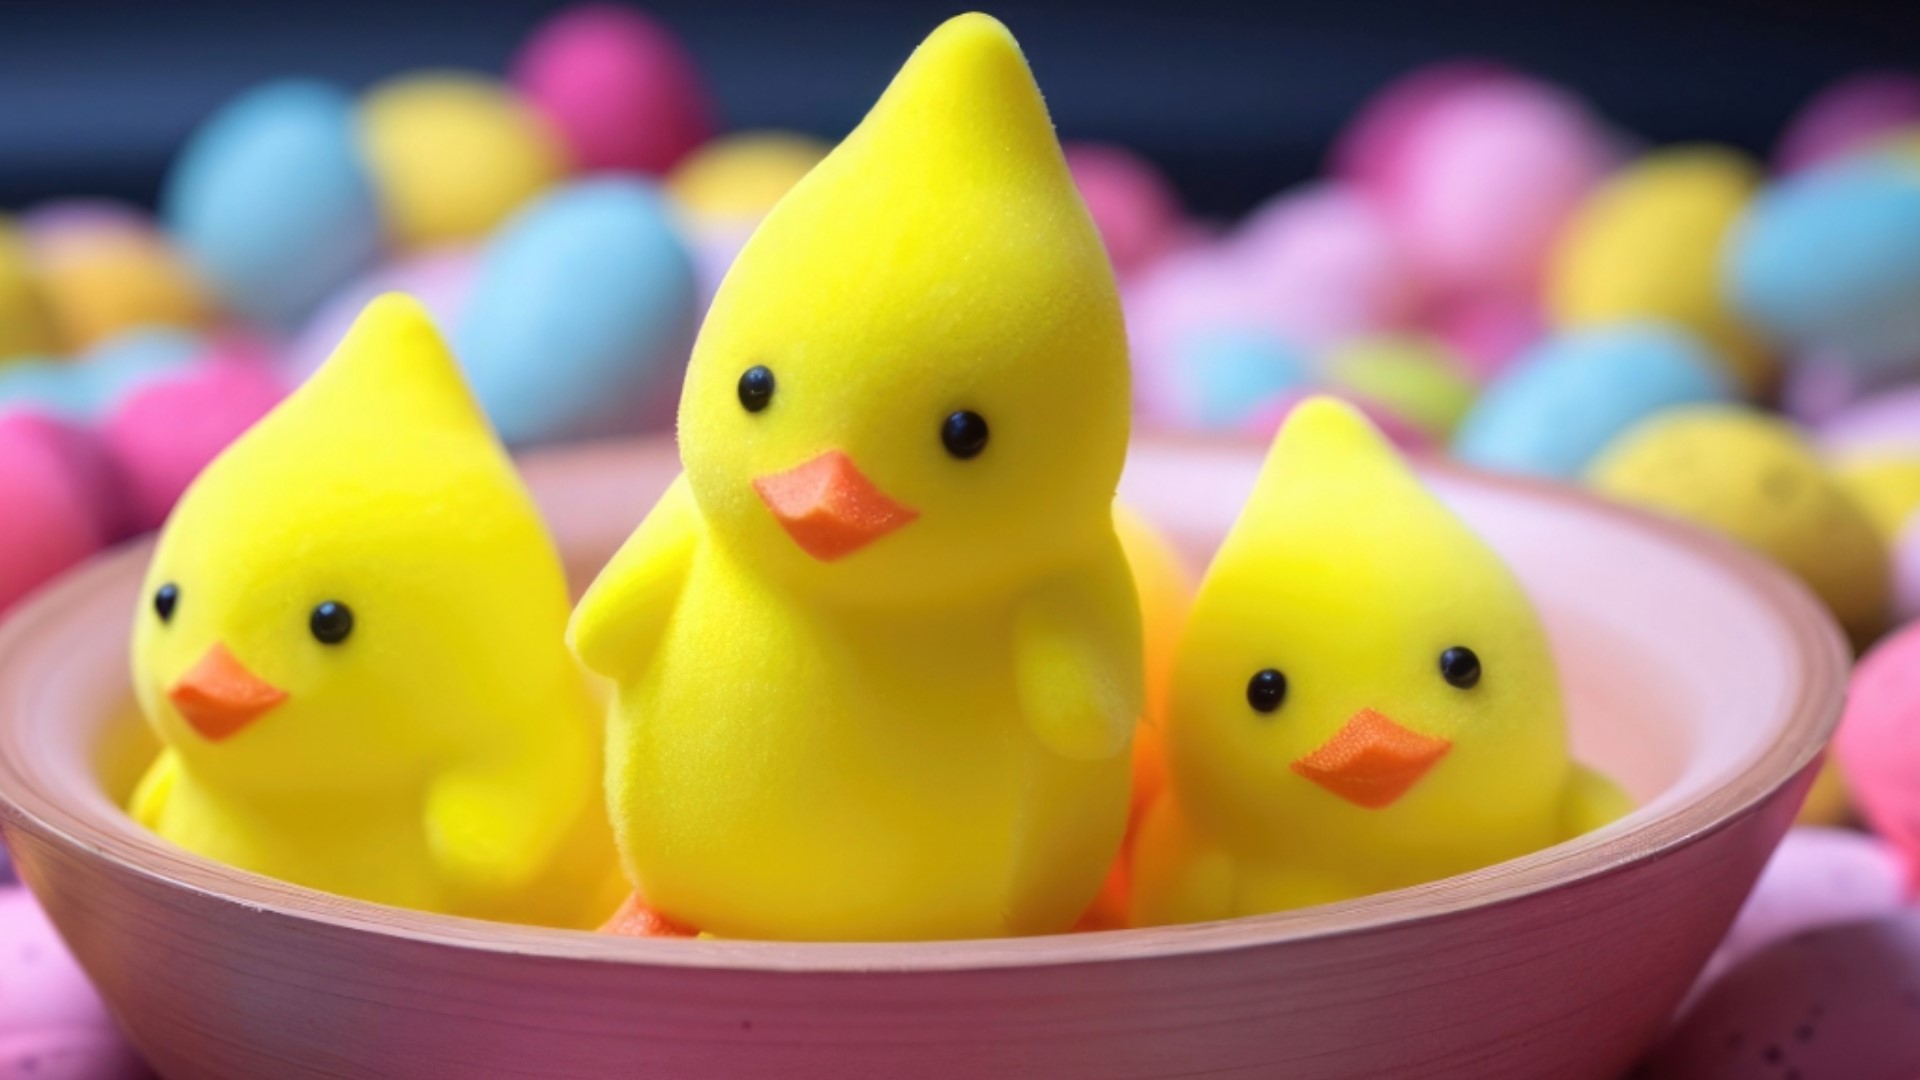 Four new Peeps flavors will be unveiled ahead of Easter, and three are in-store exclusives.